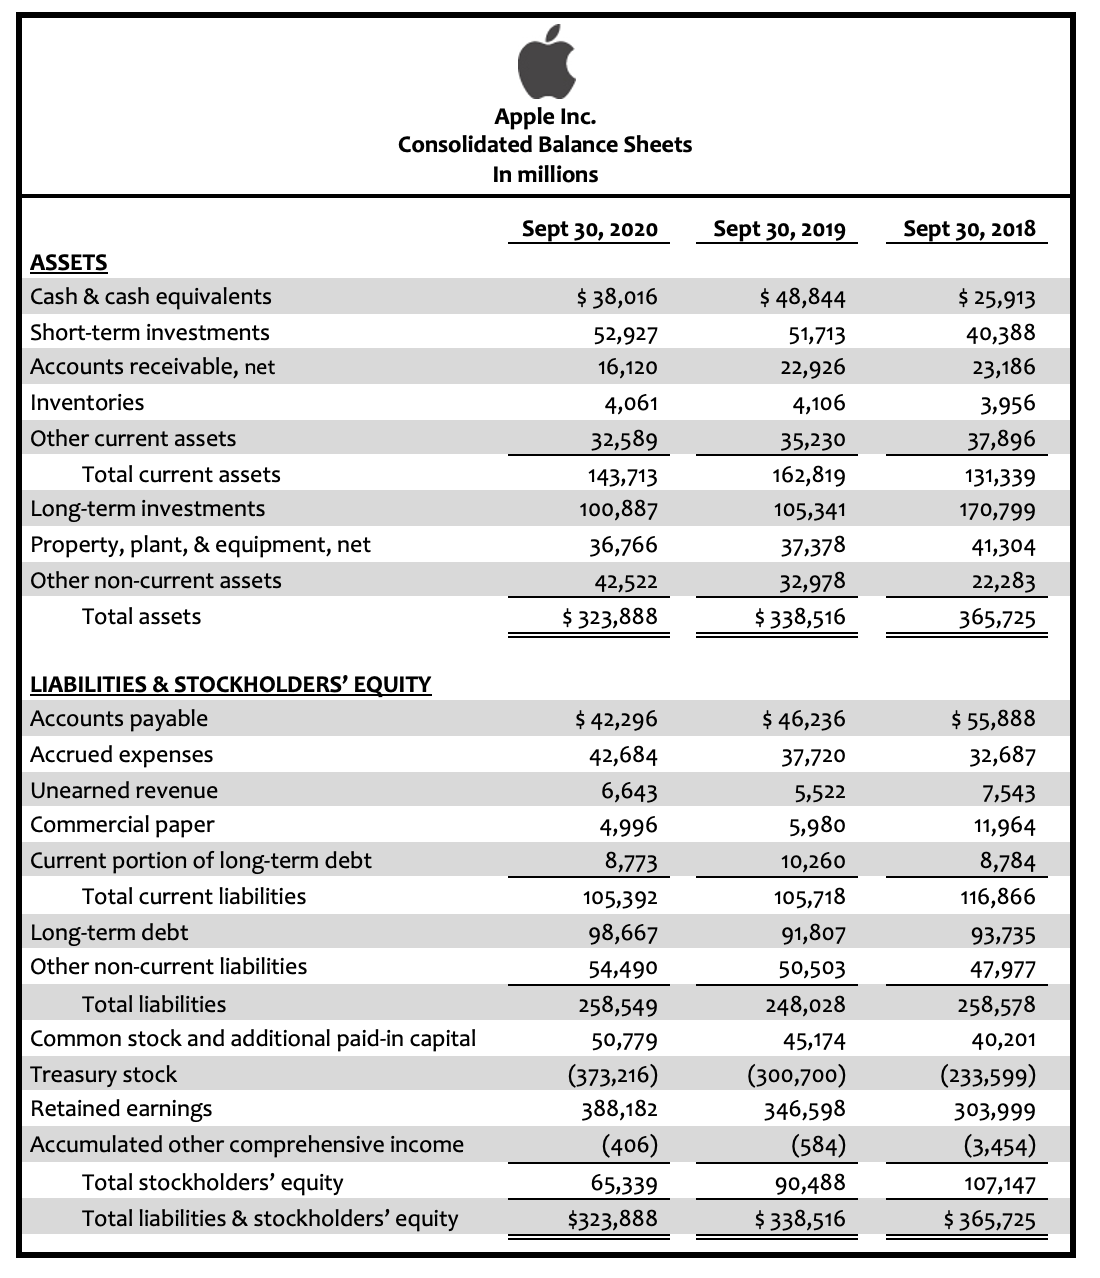 Apple Inc.
Consolidated Balance Sheets
In millions
Sept 30, 2020
Sept 30, 2019
Sept 30, 2018
ASSETS
Cash & cash equivalents
$ 38,016
$ 48,844
$ 25,913
Short-term investments
52,927
51,713
40,388
Accounts receivable, net
16,120
22,926
23,186
Inventories
4,061
4,106
3,956
Other current assets
32,589
35,230
37,896
Total current assets
143,713
162,819
131,339
Long-term investments
100,887
105,341
170,799
Property, plant, & equipment, net
36,766
37,378
41,304
Other non-current assets
42,522
32,978
22,283
Total assets
$ 323,888
$ 338,516
365,725
LIABILITIES & STOCKHOLDERS' EQUITY
Accounts payable
$ 42,296
$ 46,236
$ 55,888
Accrued expenses
42,684
37,720
32,687
Unearned revenue
6,643
5,522
7,543
Commercial paper
4,996
5,980
11,964
Current portion of long-term debt
8,773
10,260
8,784
Total current liabilities
105,392
105,718
116,866
Long-term debt
98,667
91,807
93,735
Other non-current liabilities
54,490
50,503
47,977
Total liabilities
258,549
248,028
258,578
Common stock and additional paid-in capital
50,779
45,174
40,201
Treasury stock
Retained earnings
(373,216)
(300,700)
346,598
(233,599)
388,182
303,999
Accumulated other comprehensive income
(406)
(584)
(3,454)
Total stockholders' equity
65,339
90,488
107,147
Total liabilities & stockholders' equity
$323,888
$ 338,516
$ 365,725
